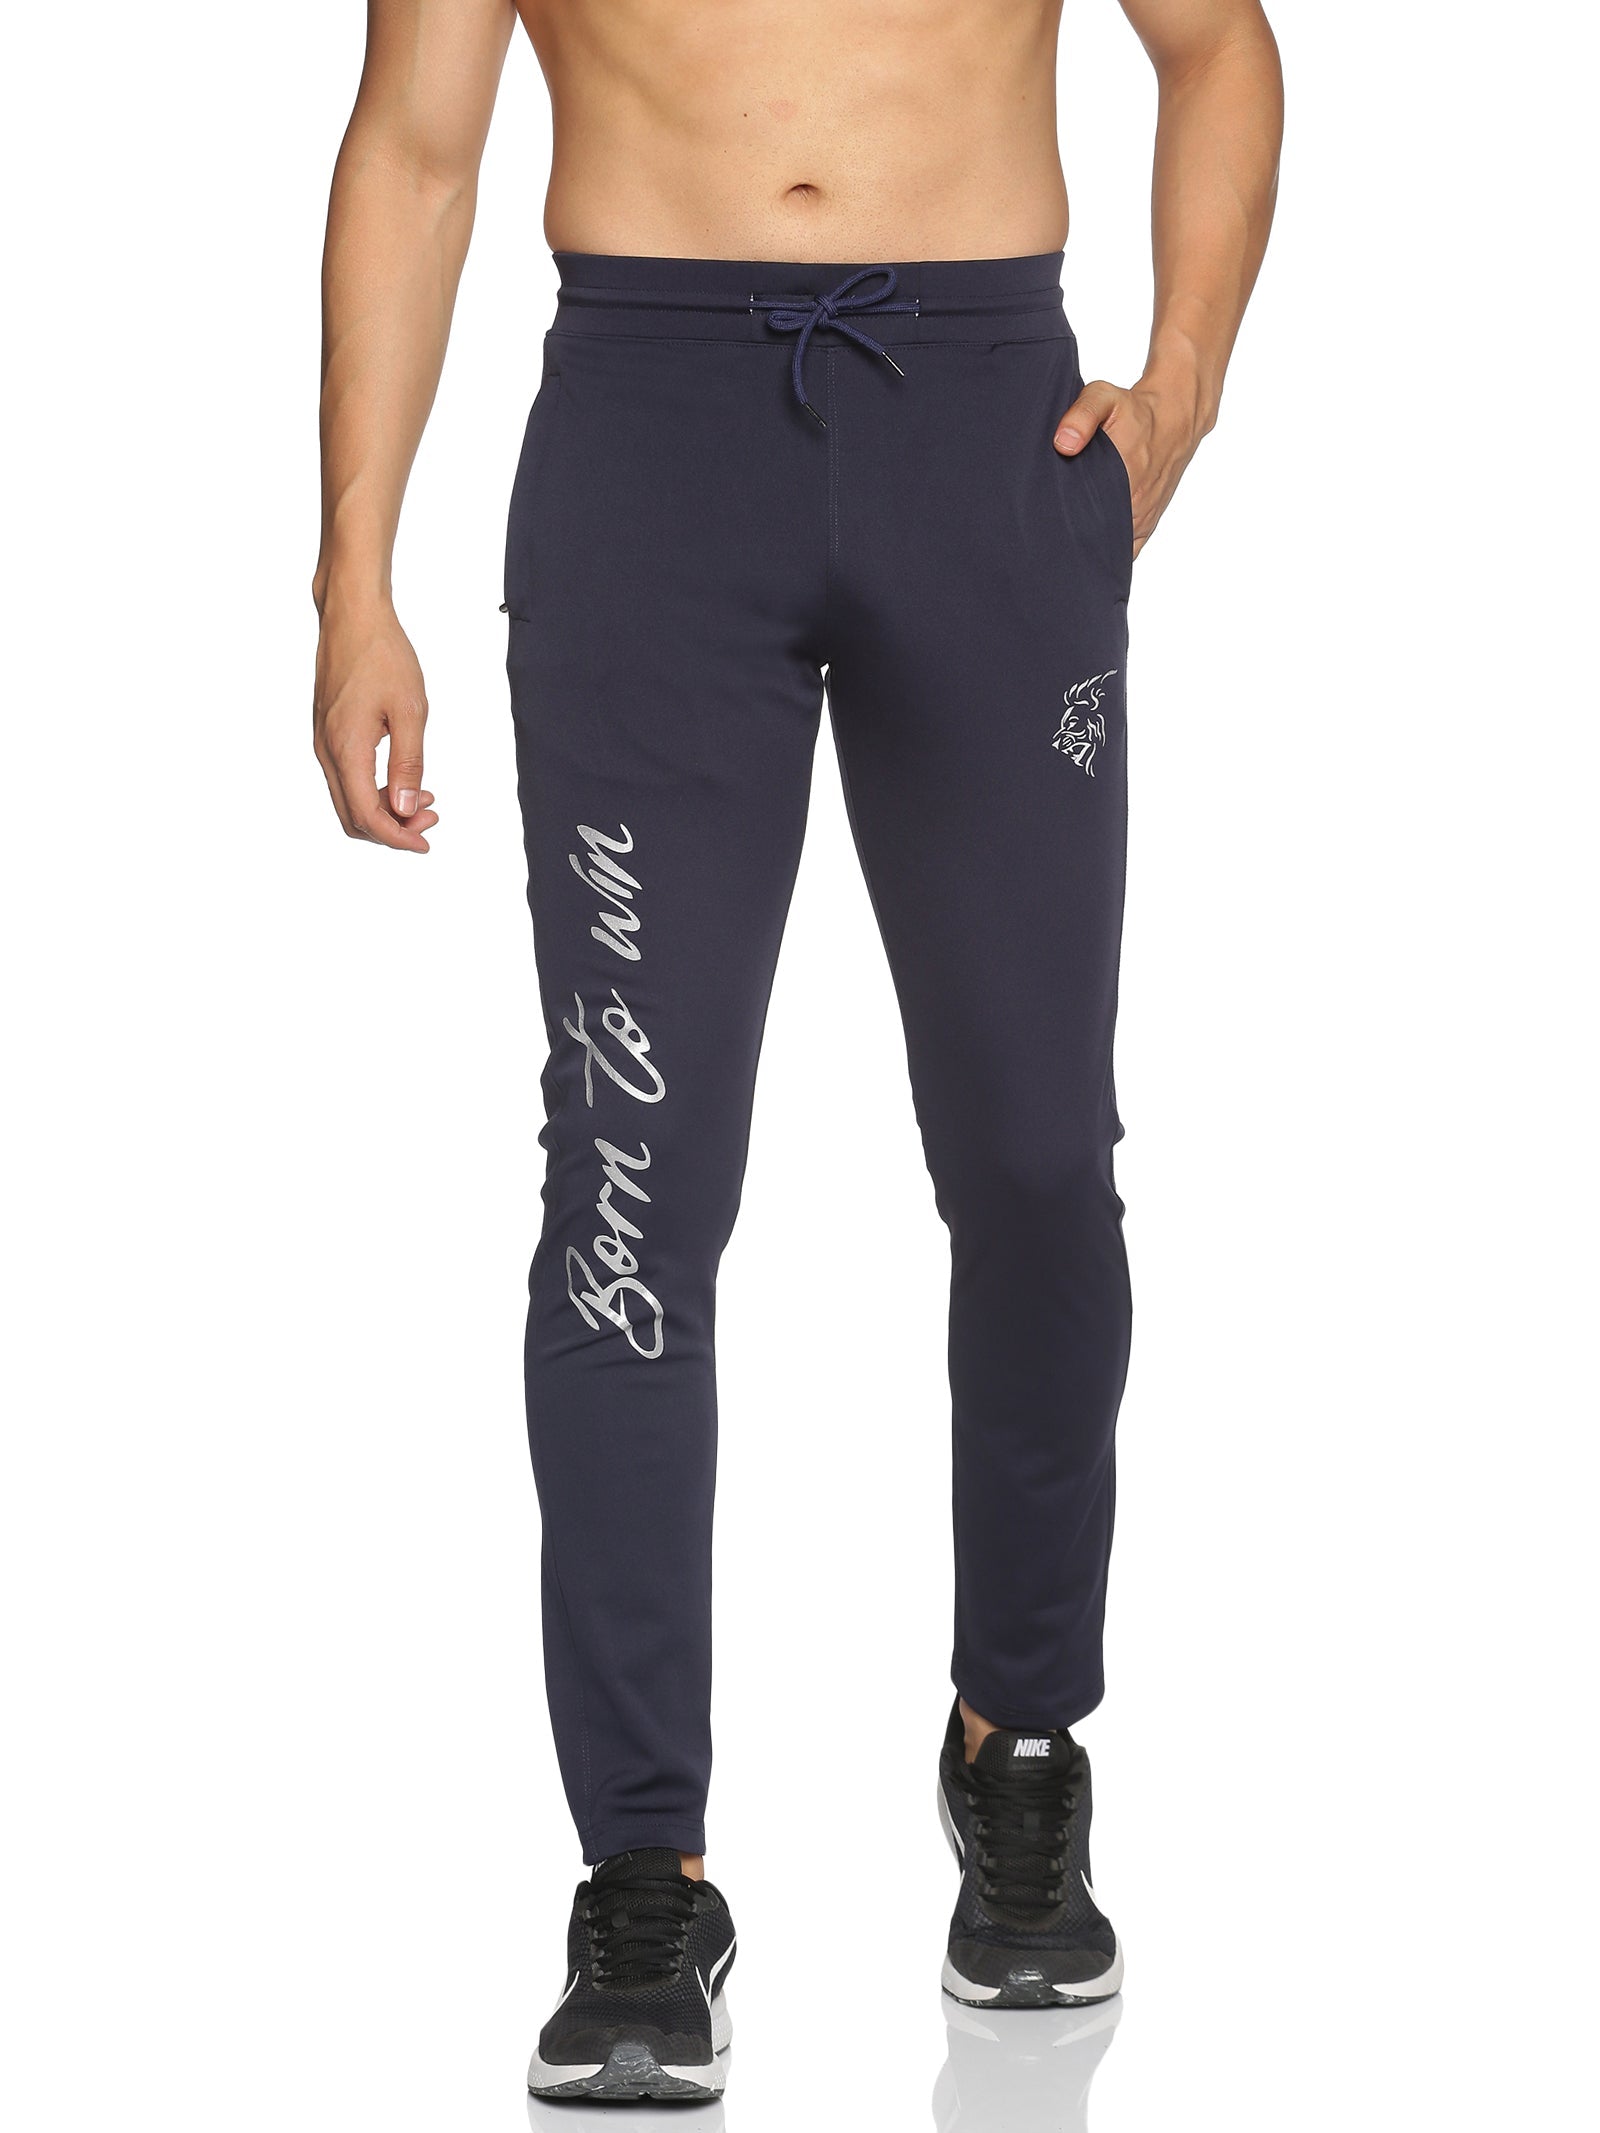 Slazenger Joggers & Track Pants for Men sale - discounted price | FASHIOLA  INDIA